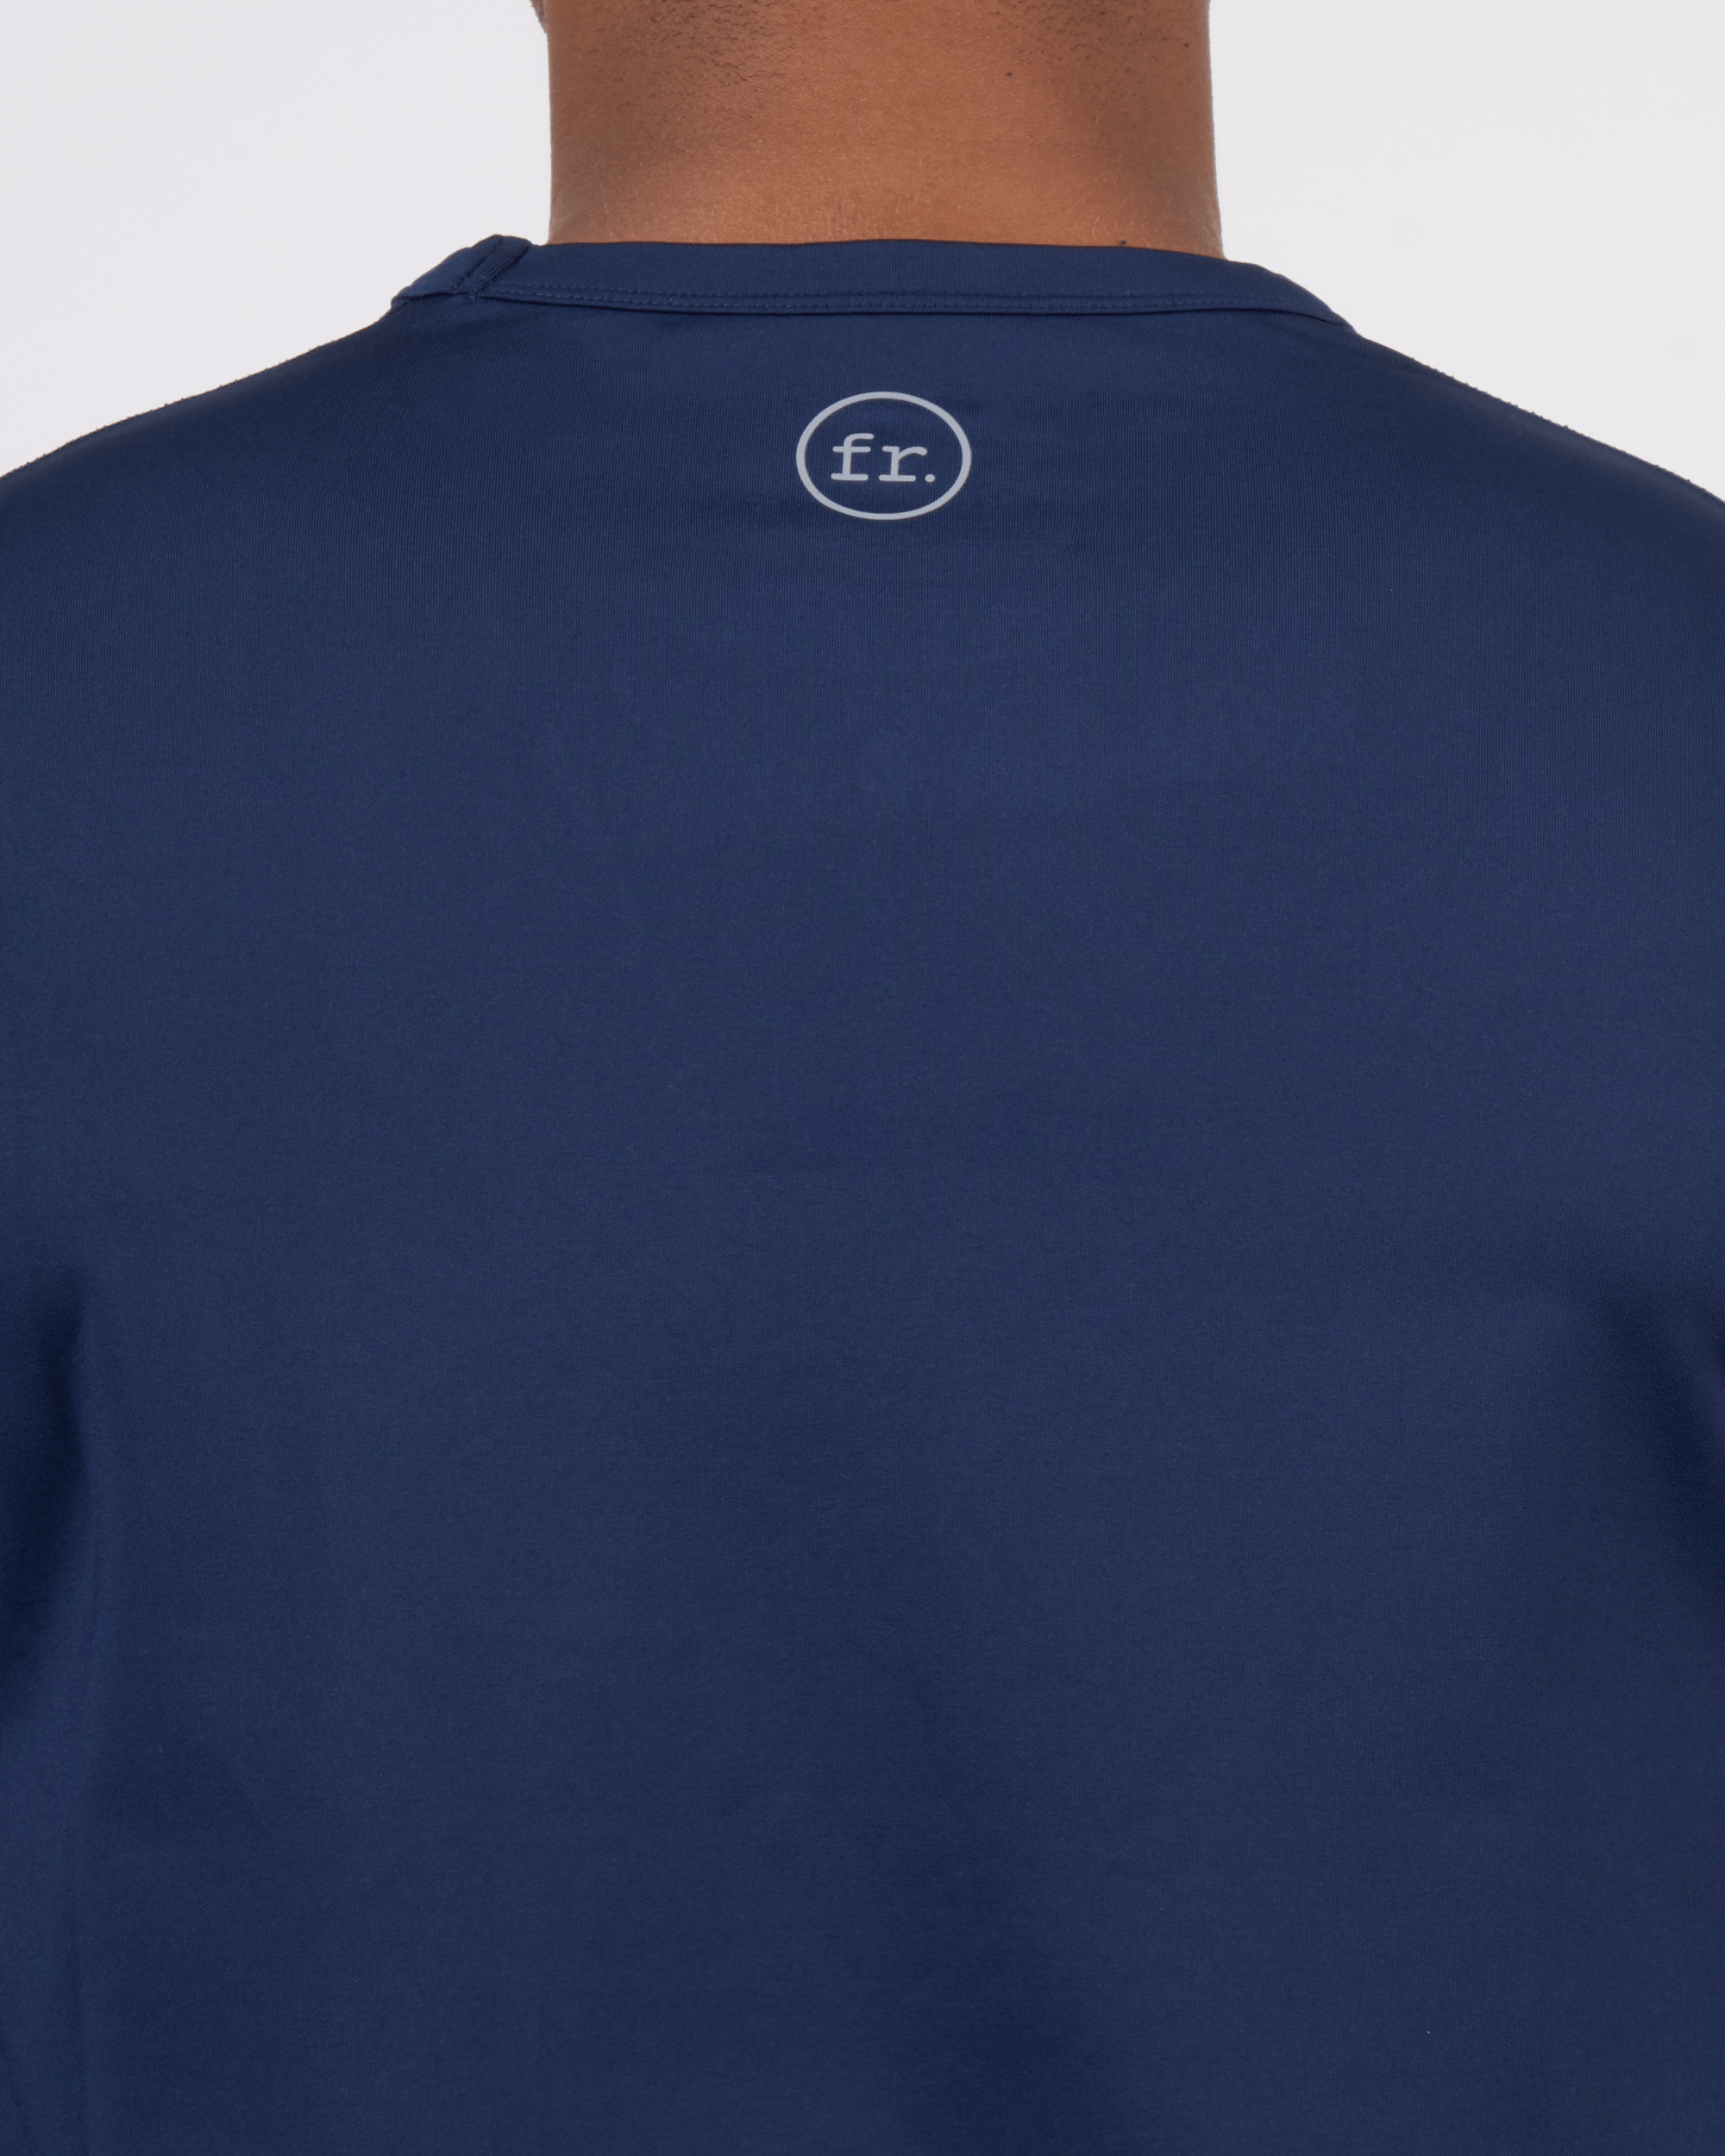 Foreign Rider Co Technical Fabric Navy Long-Sleeve T-Shirt FR Logo Back Detail